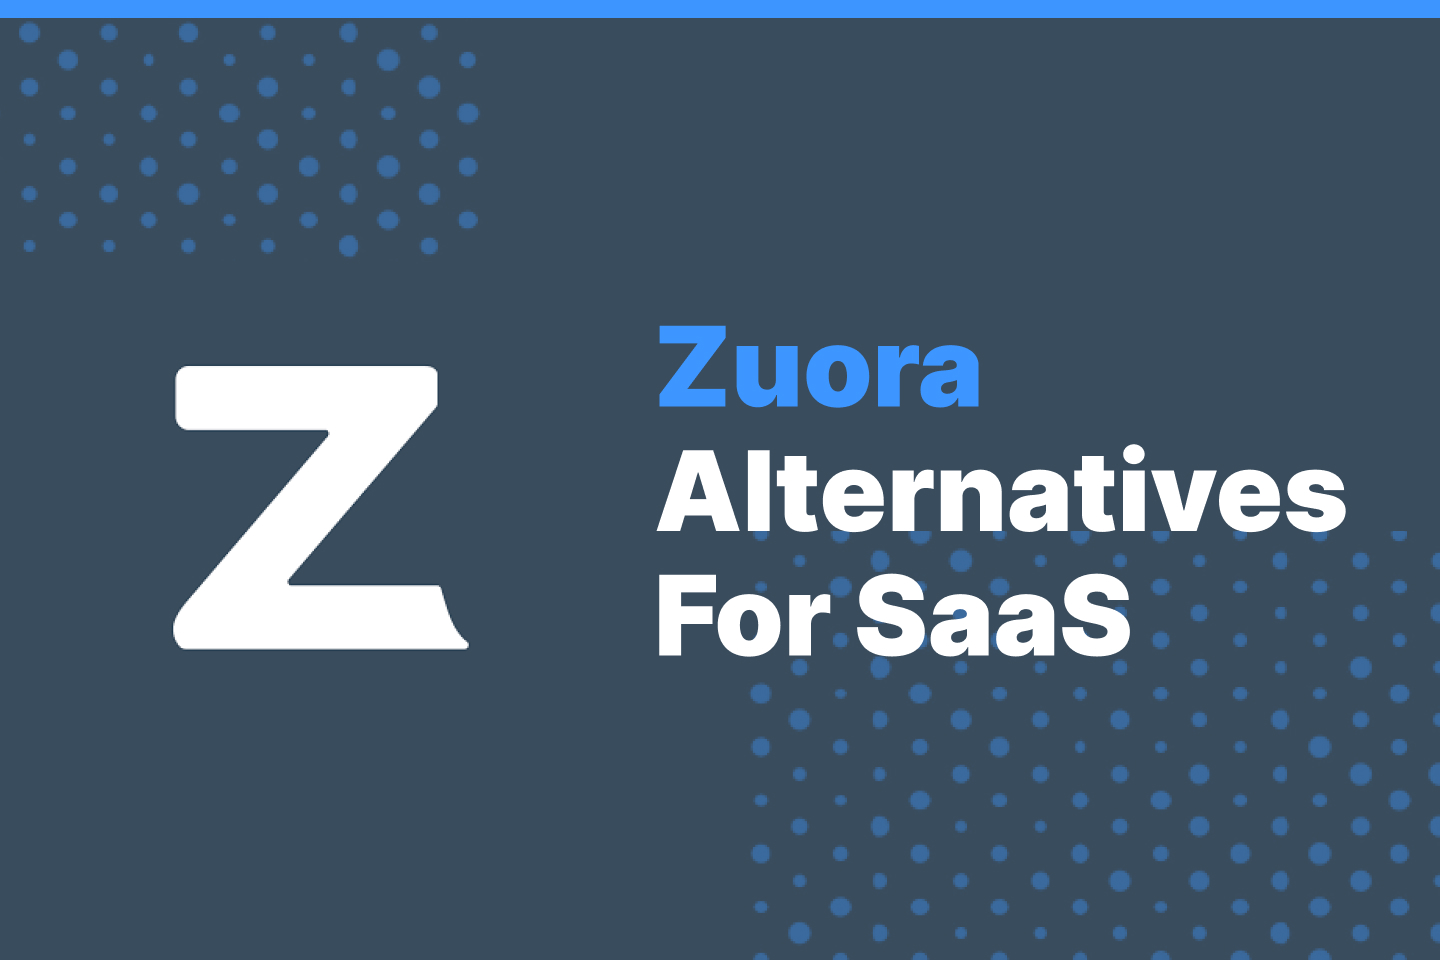 Top Zuora Alternatives and Other Revenue Analytics Tools for SaaS